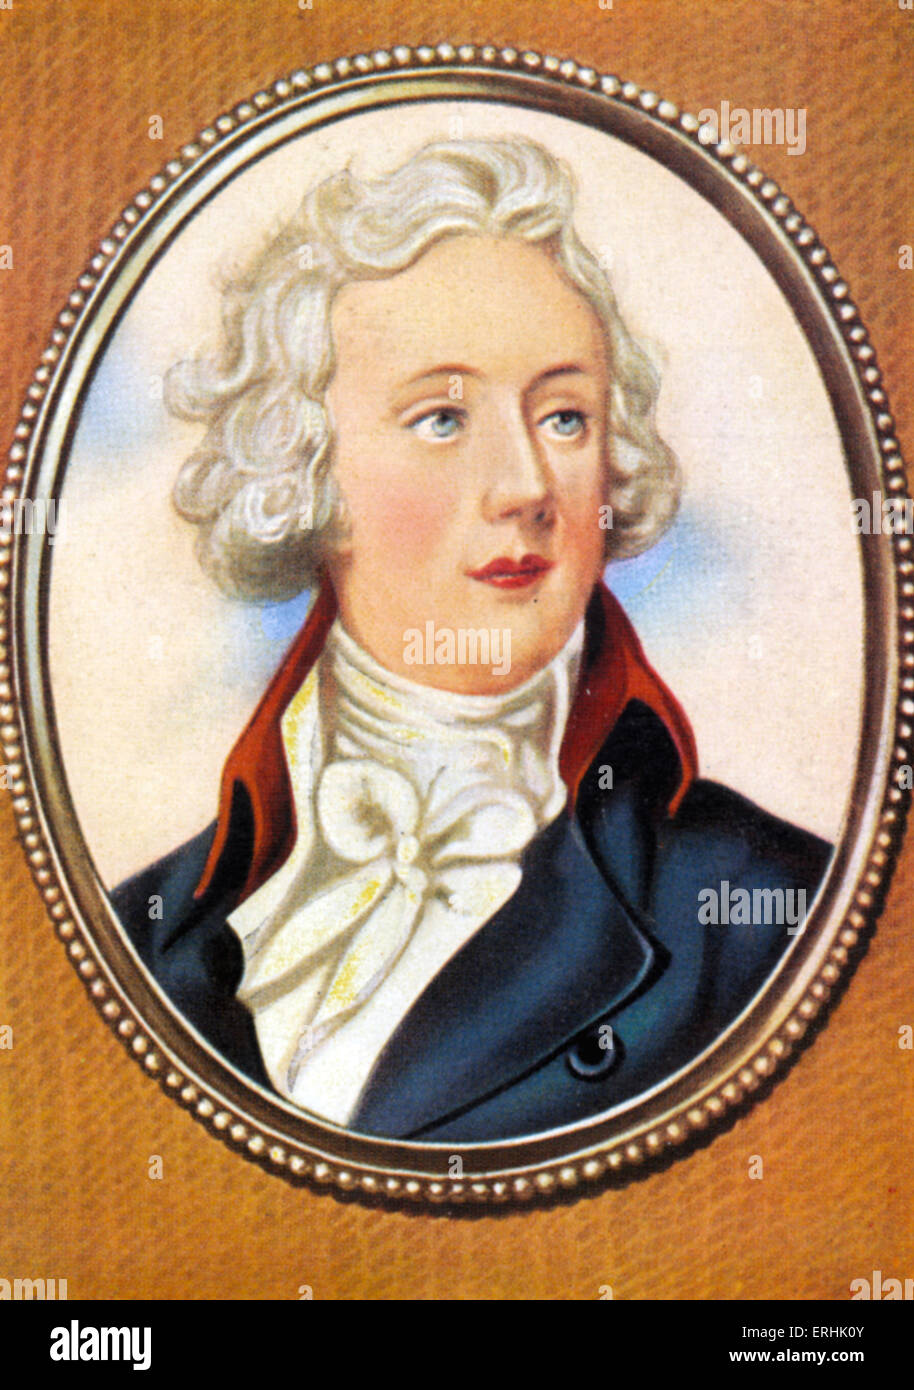 William Pitt the Younger. Portrait of the British Prime Minister. After a miniature by Horace Hone. 28 May 1759–23 January 1806 Stock Photo